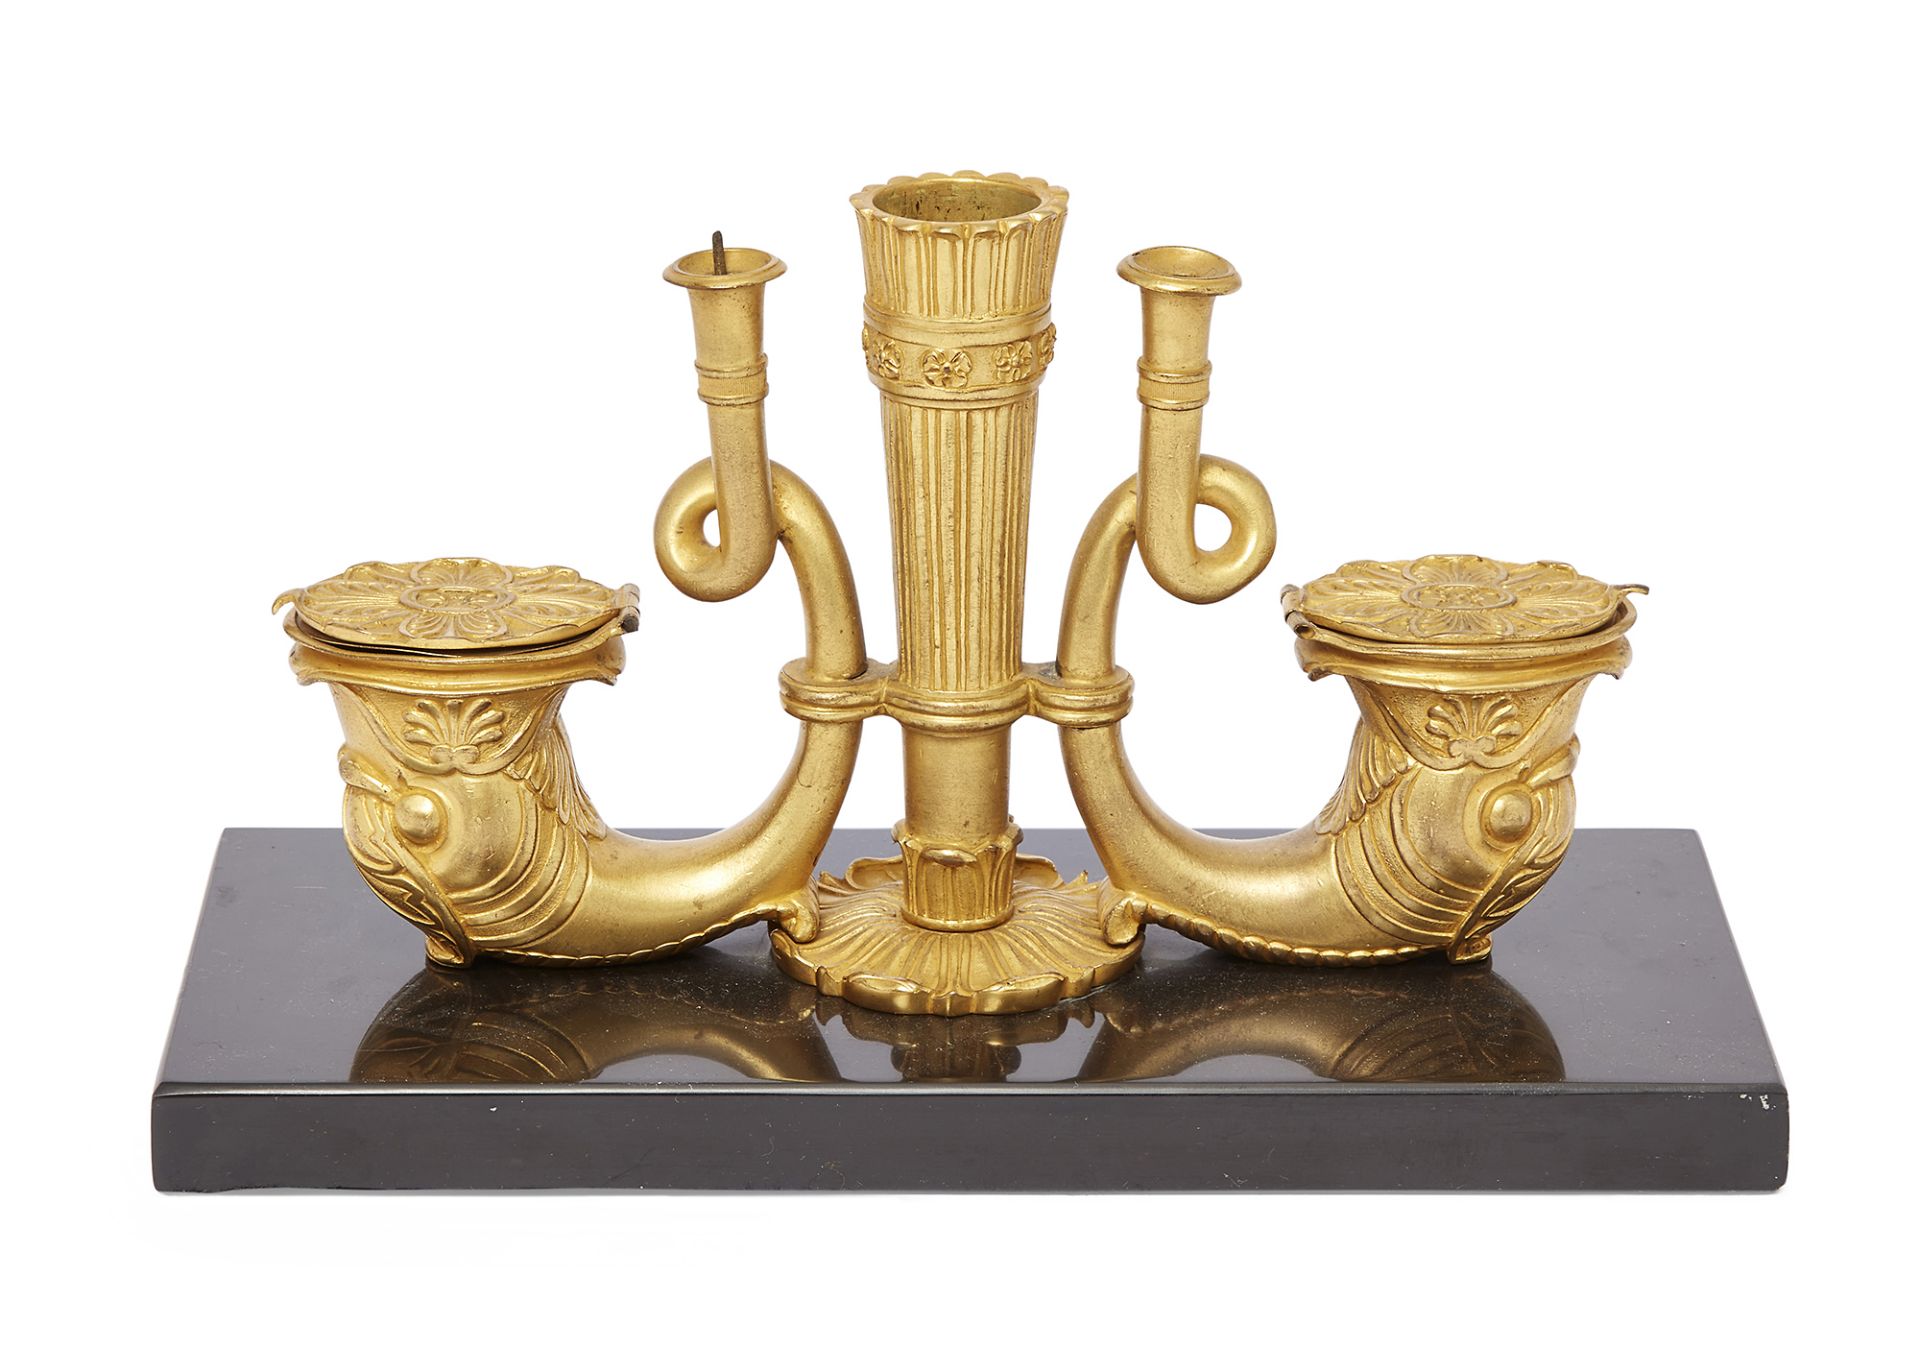 A Regency gilt-bronze desk stand, early 19th century, the well cast as twin addorsed dolphins fla...